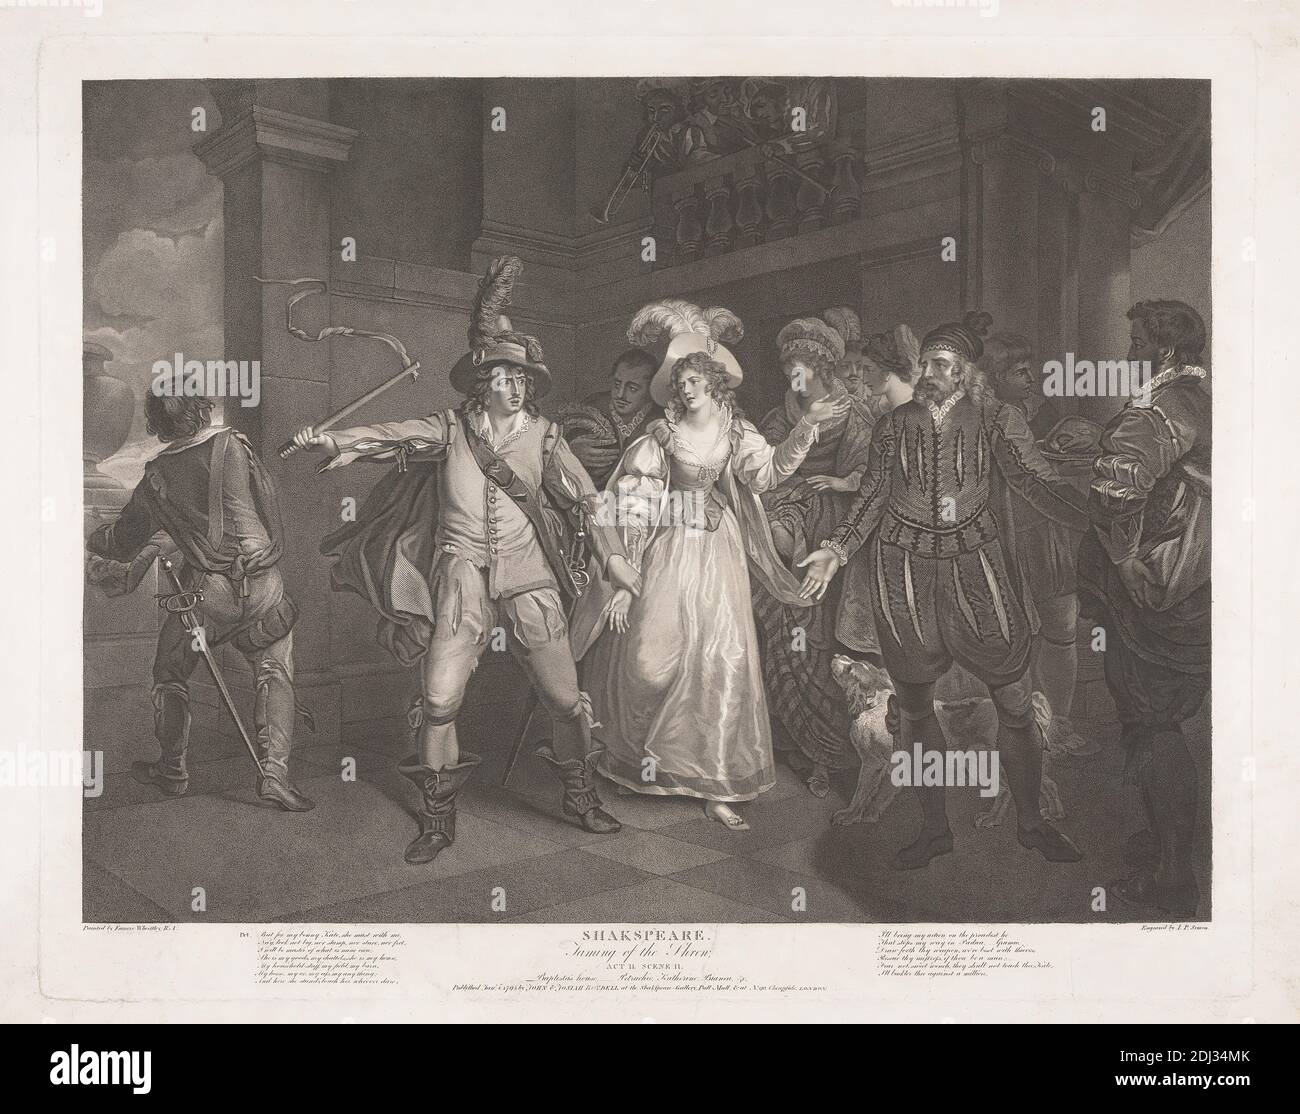 Taming of the Shrew, Act II Scene II, Peter Simon, 1750–1810, after Francis Wheatley, 1747–1801, British, 1795, Stipple engraving on moderately thick, moderately textured, cream, wove paper, Sheet: 22 7/16 × 28 inches (57 × 71.1 cm), Plate: 19 3/4 × 24 15/16 inches (50.2 × 63.3 cm), and Image: 17 5/16 × 23 1/8 inches (44 × 58.7 cm Stock Photo